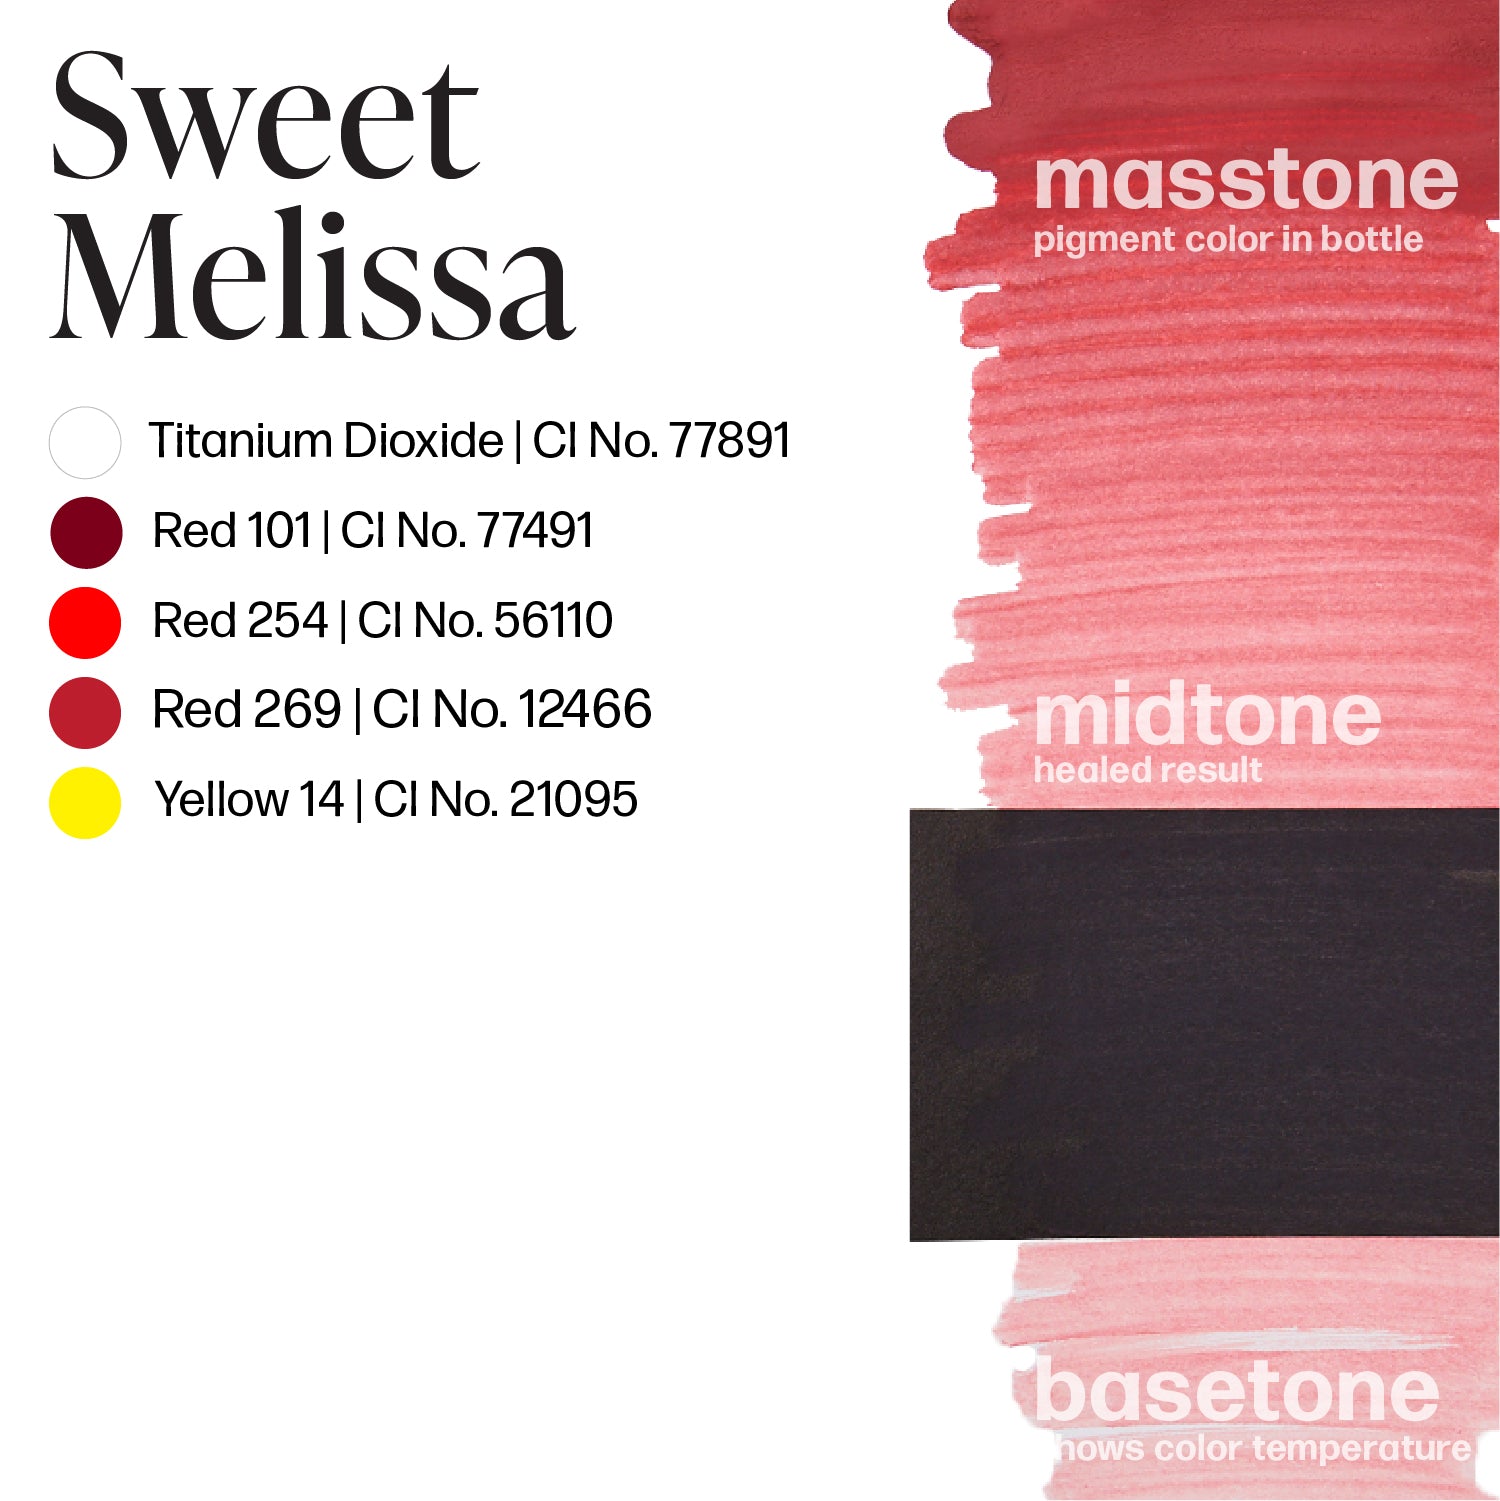 Perma Blend - Sultry Lip - Sweet Melissa - Ultimate Tattoo Supply